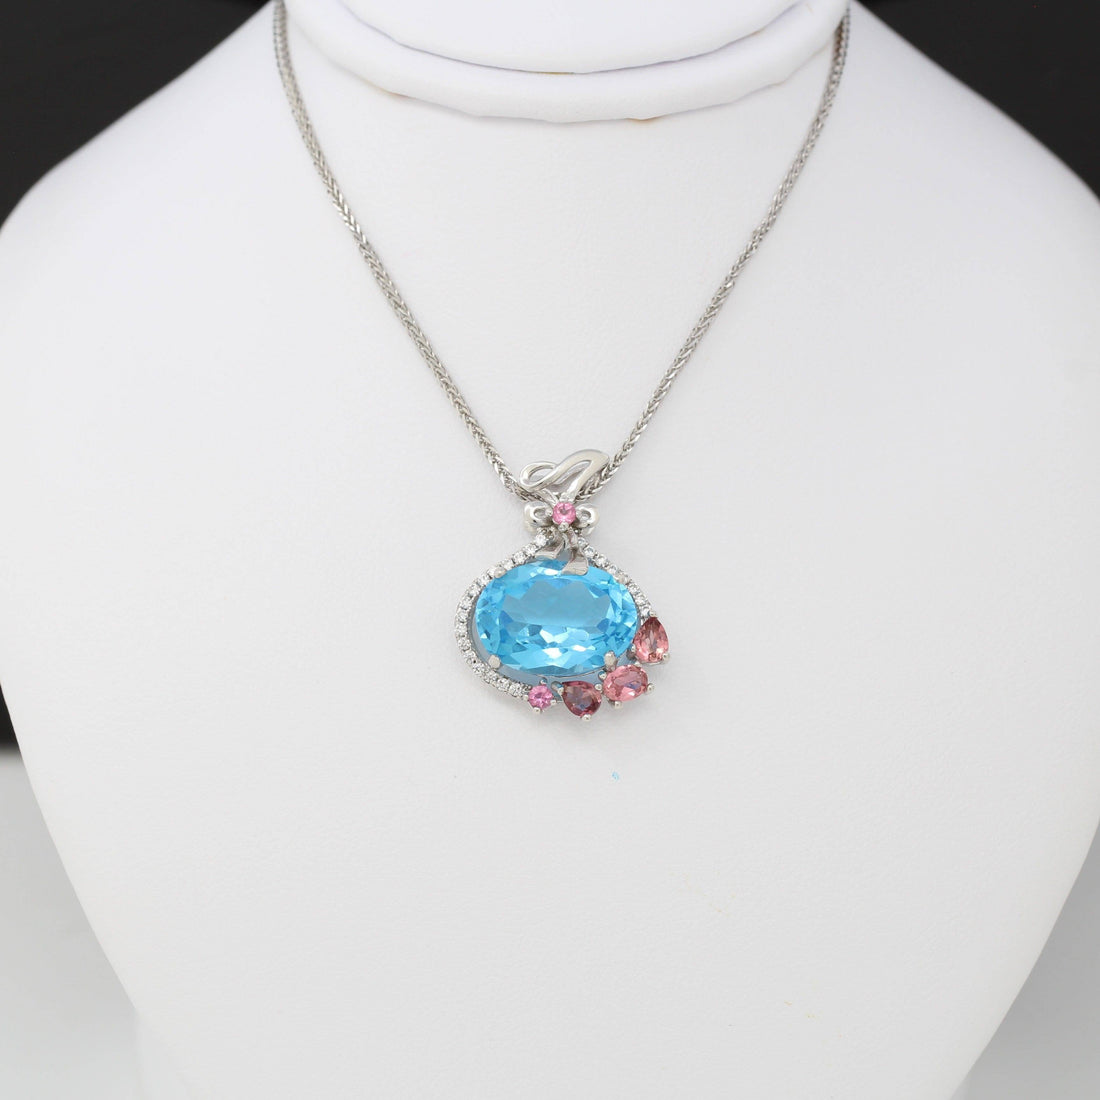 Sterling Silver Topaz Necklace With Tourmaline and Zircon Accent Stones-Baikalla Happy Valley Oregon